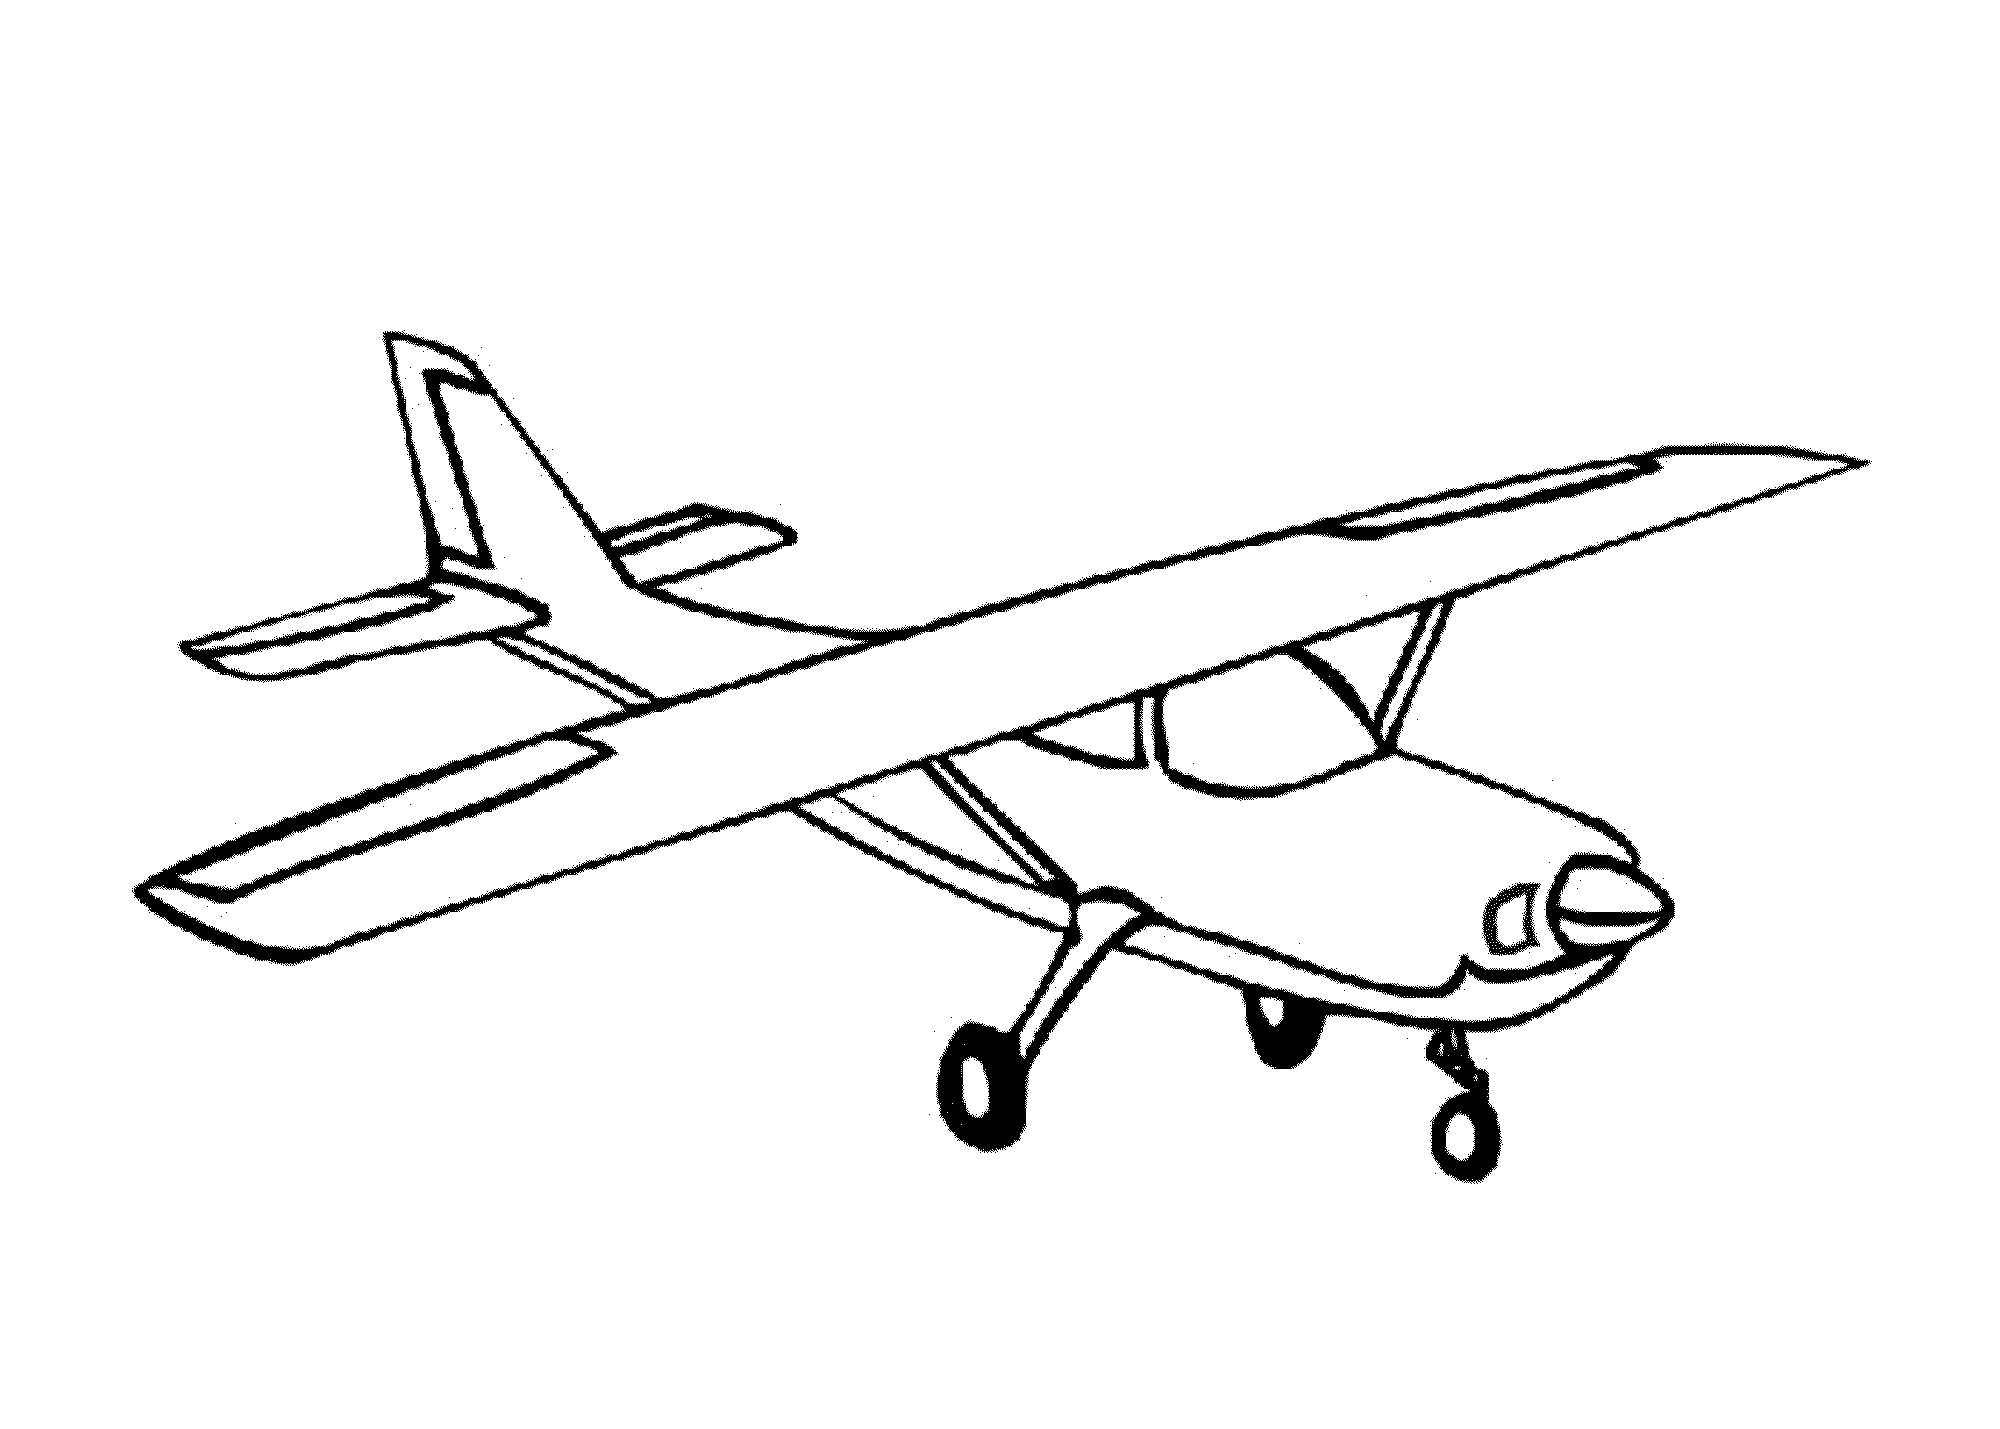 assembly drawing airplane simple